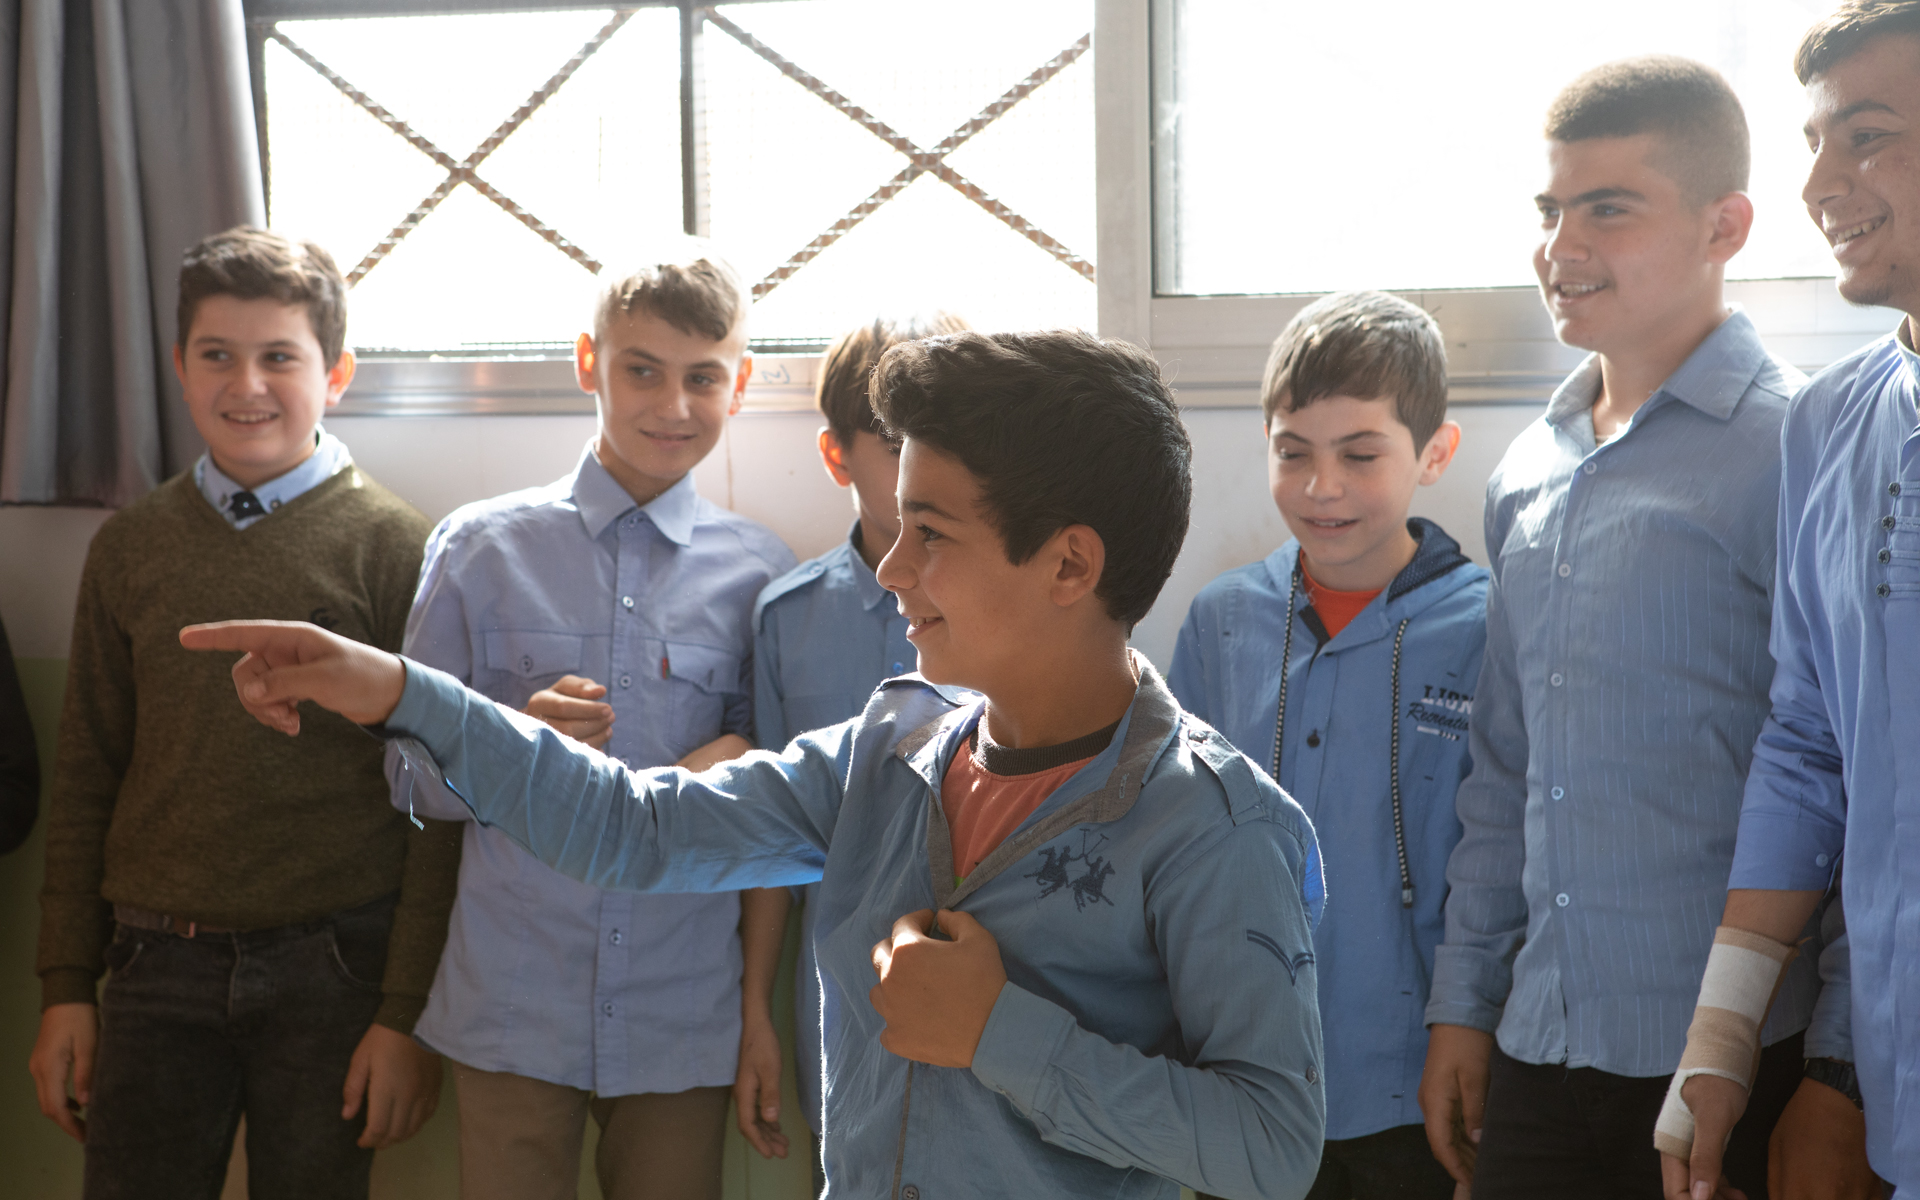 Smiling boy is poking someone with his finger. A group of boys stand behind him in front of a window.